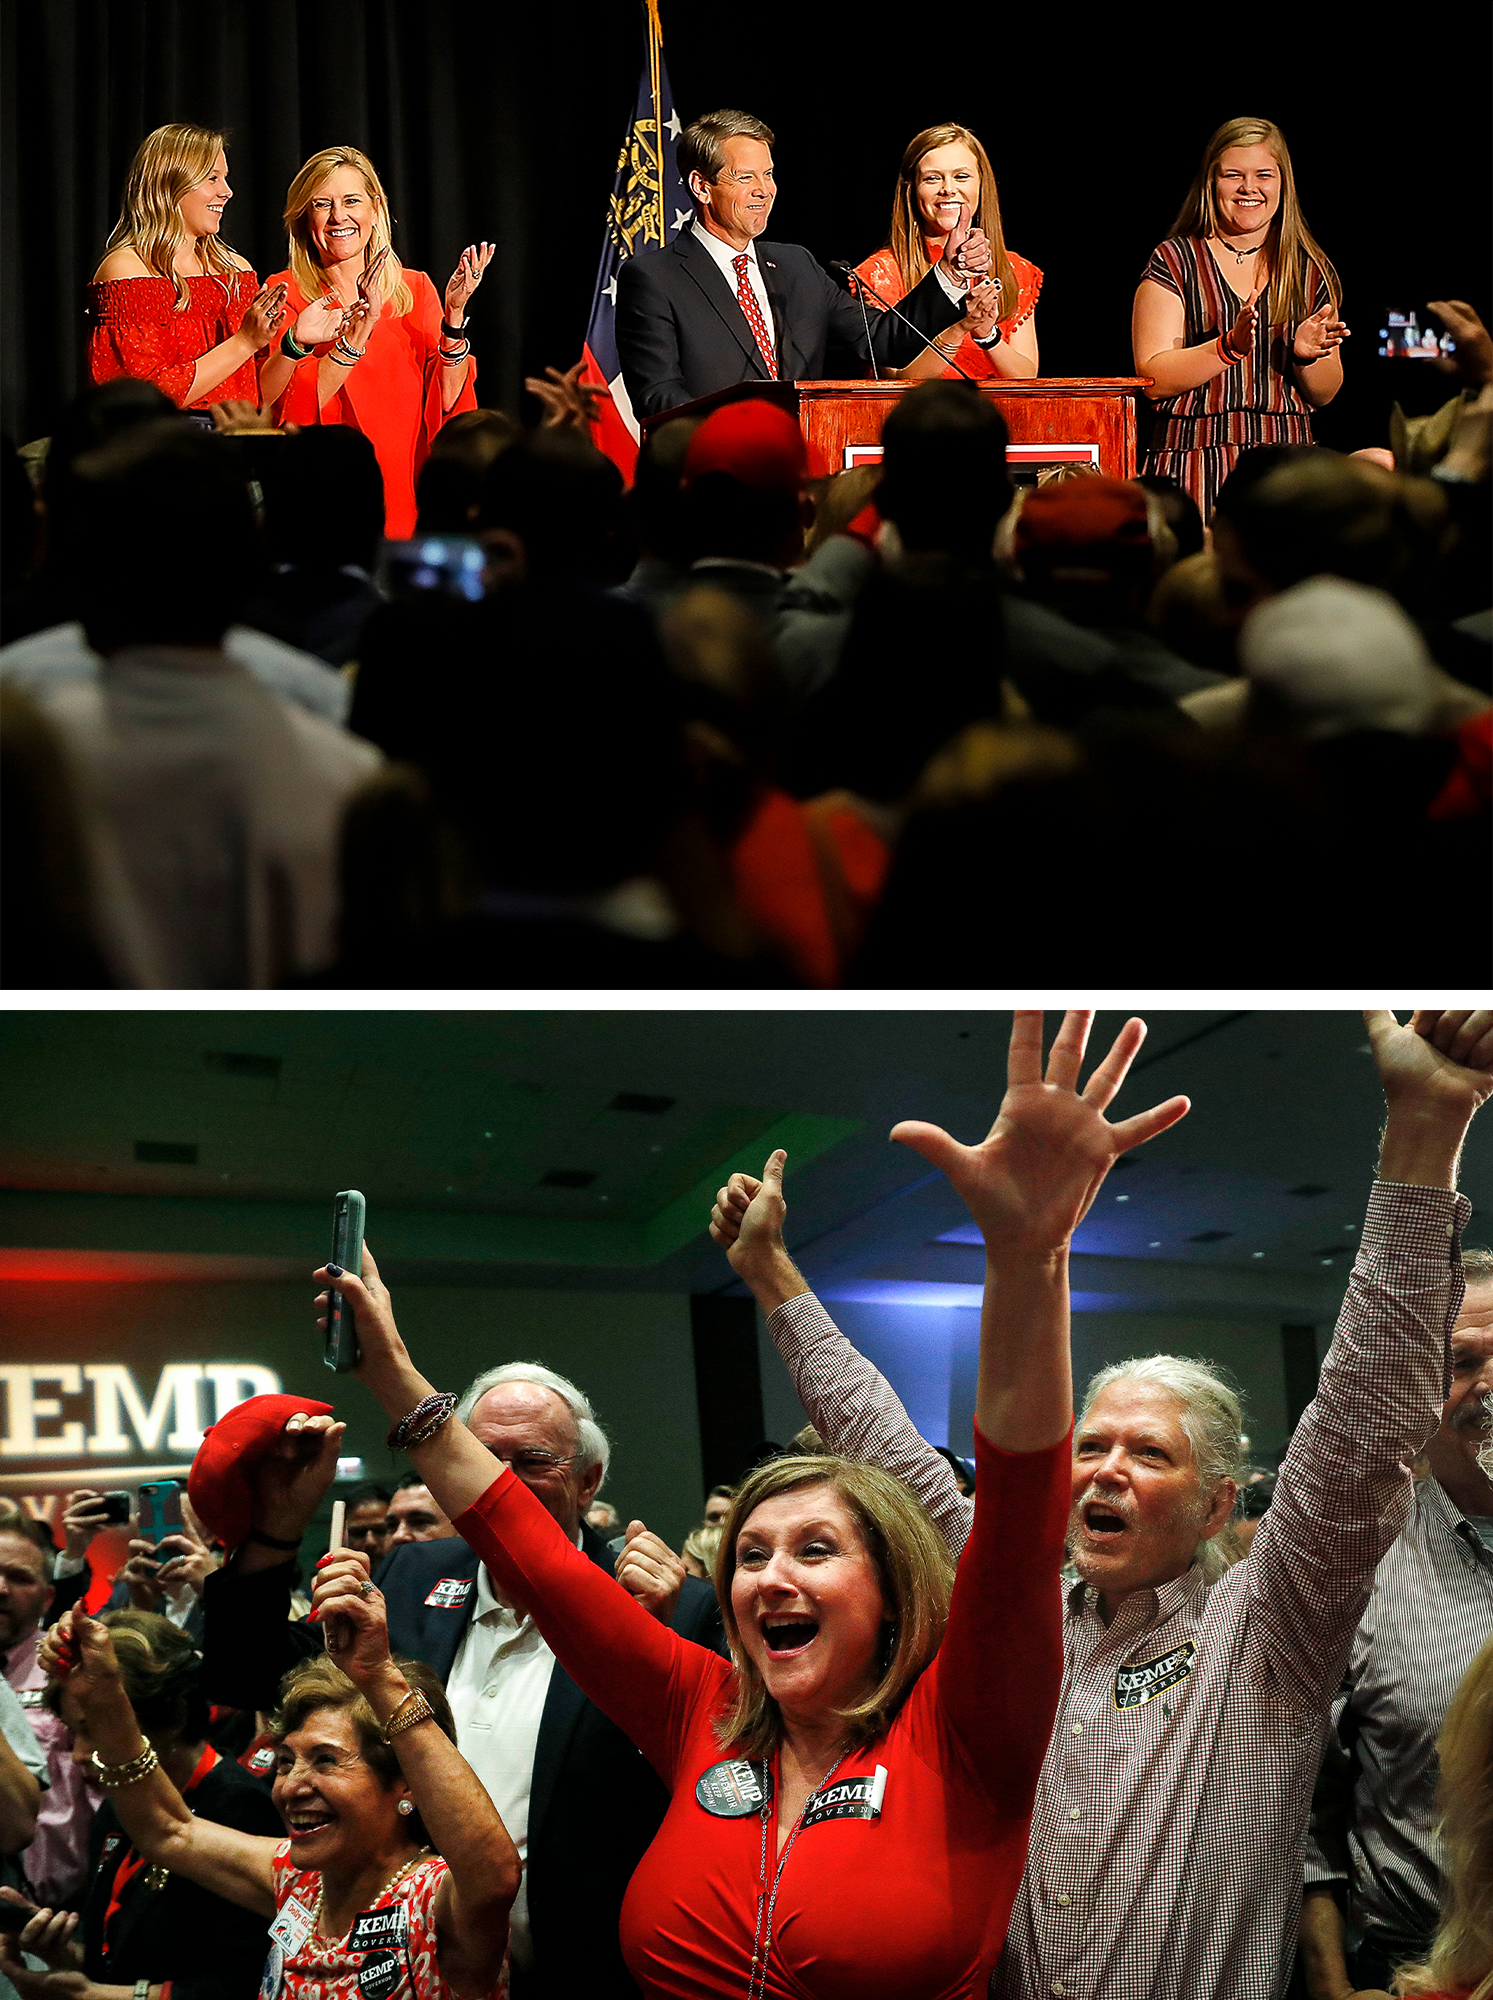 Scenes from Brian Kemp's 2018 election night event in Athens, Ga., where he defeated Abrams for the governorship by about 55,000 votes.